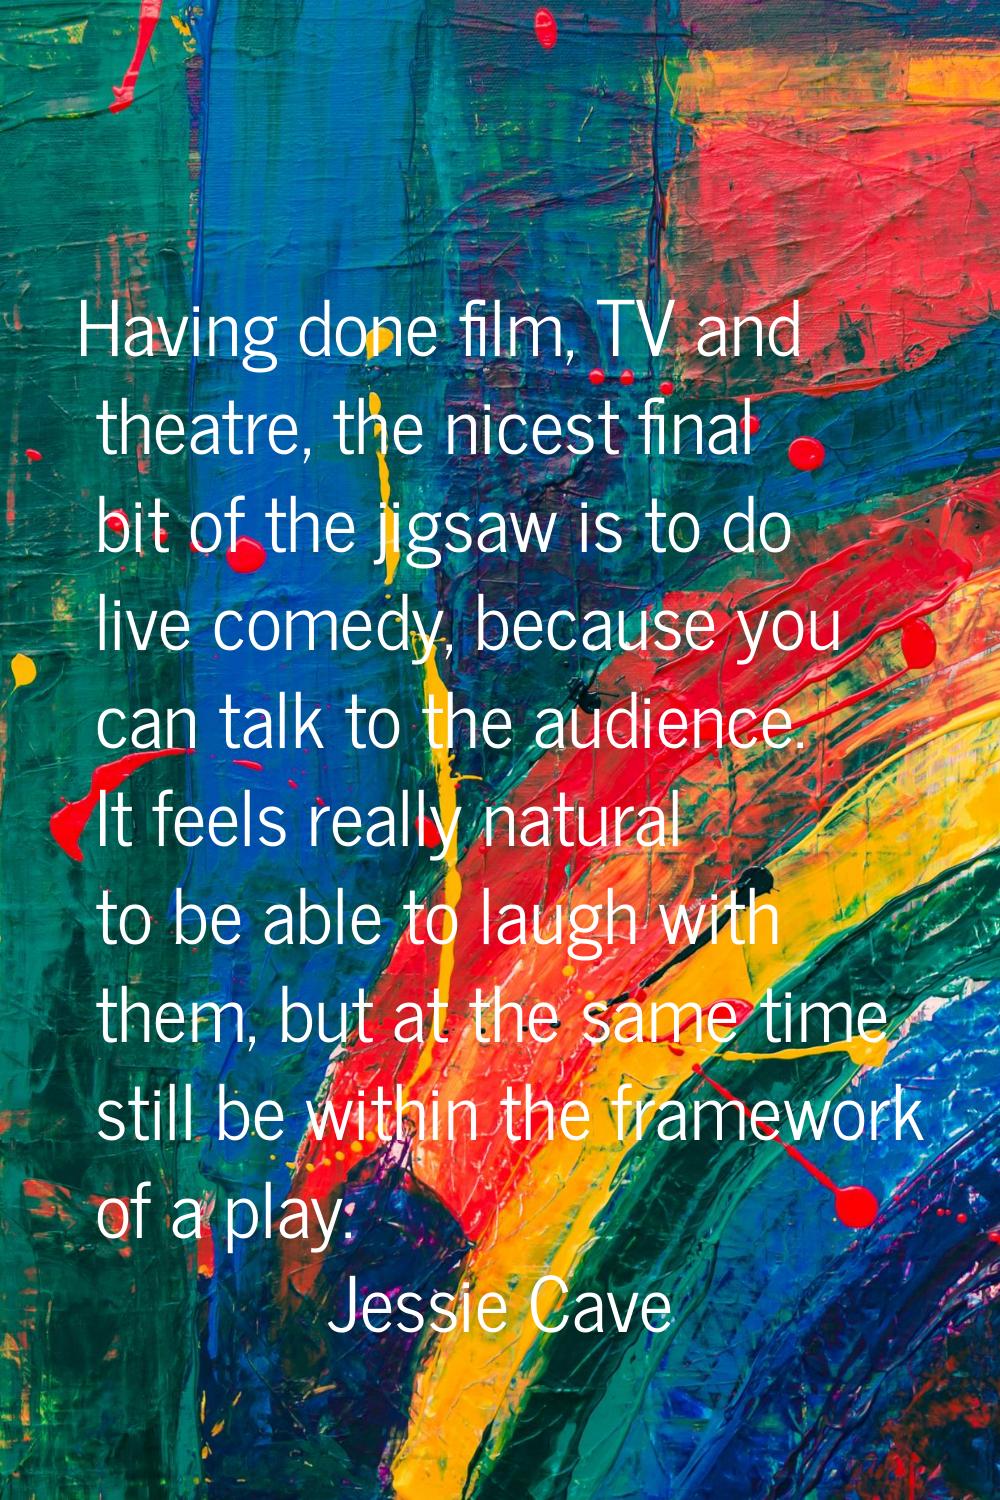 Having done film, TV and theatre, the nicest final bit of the jigsaw is to do live comedy, because 